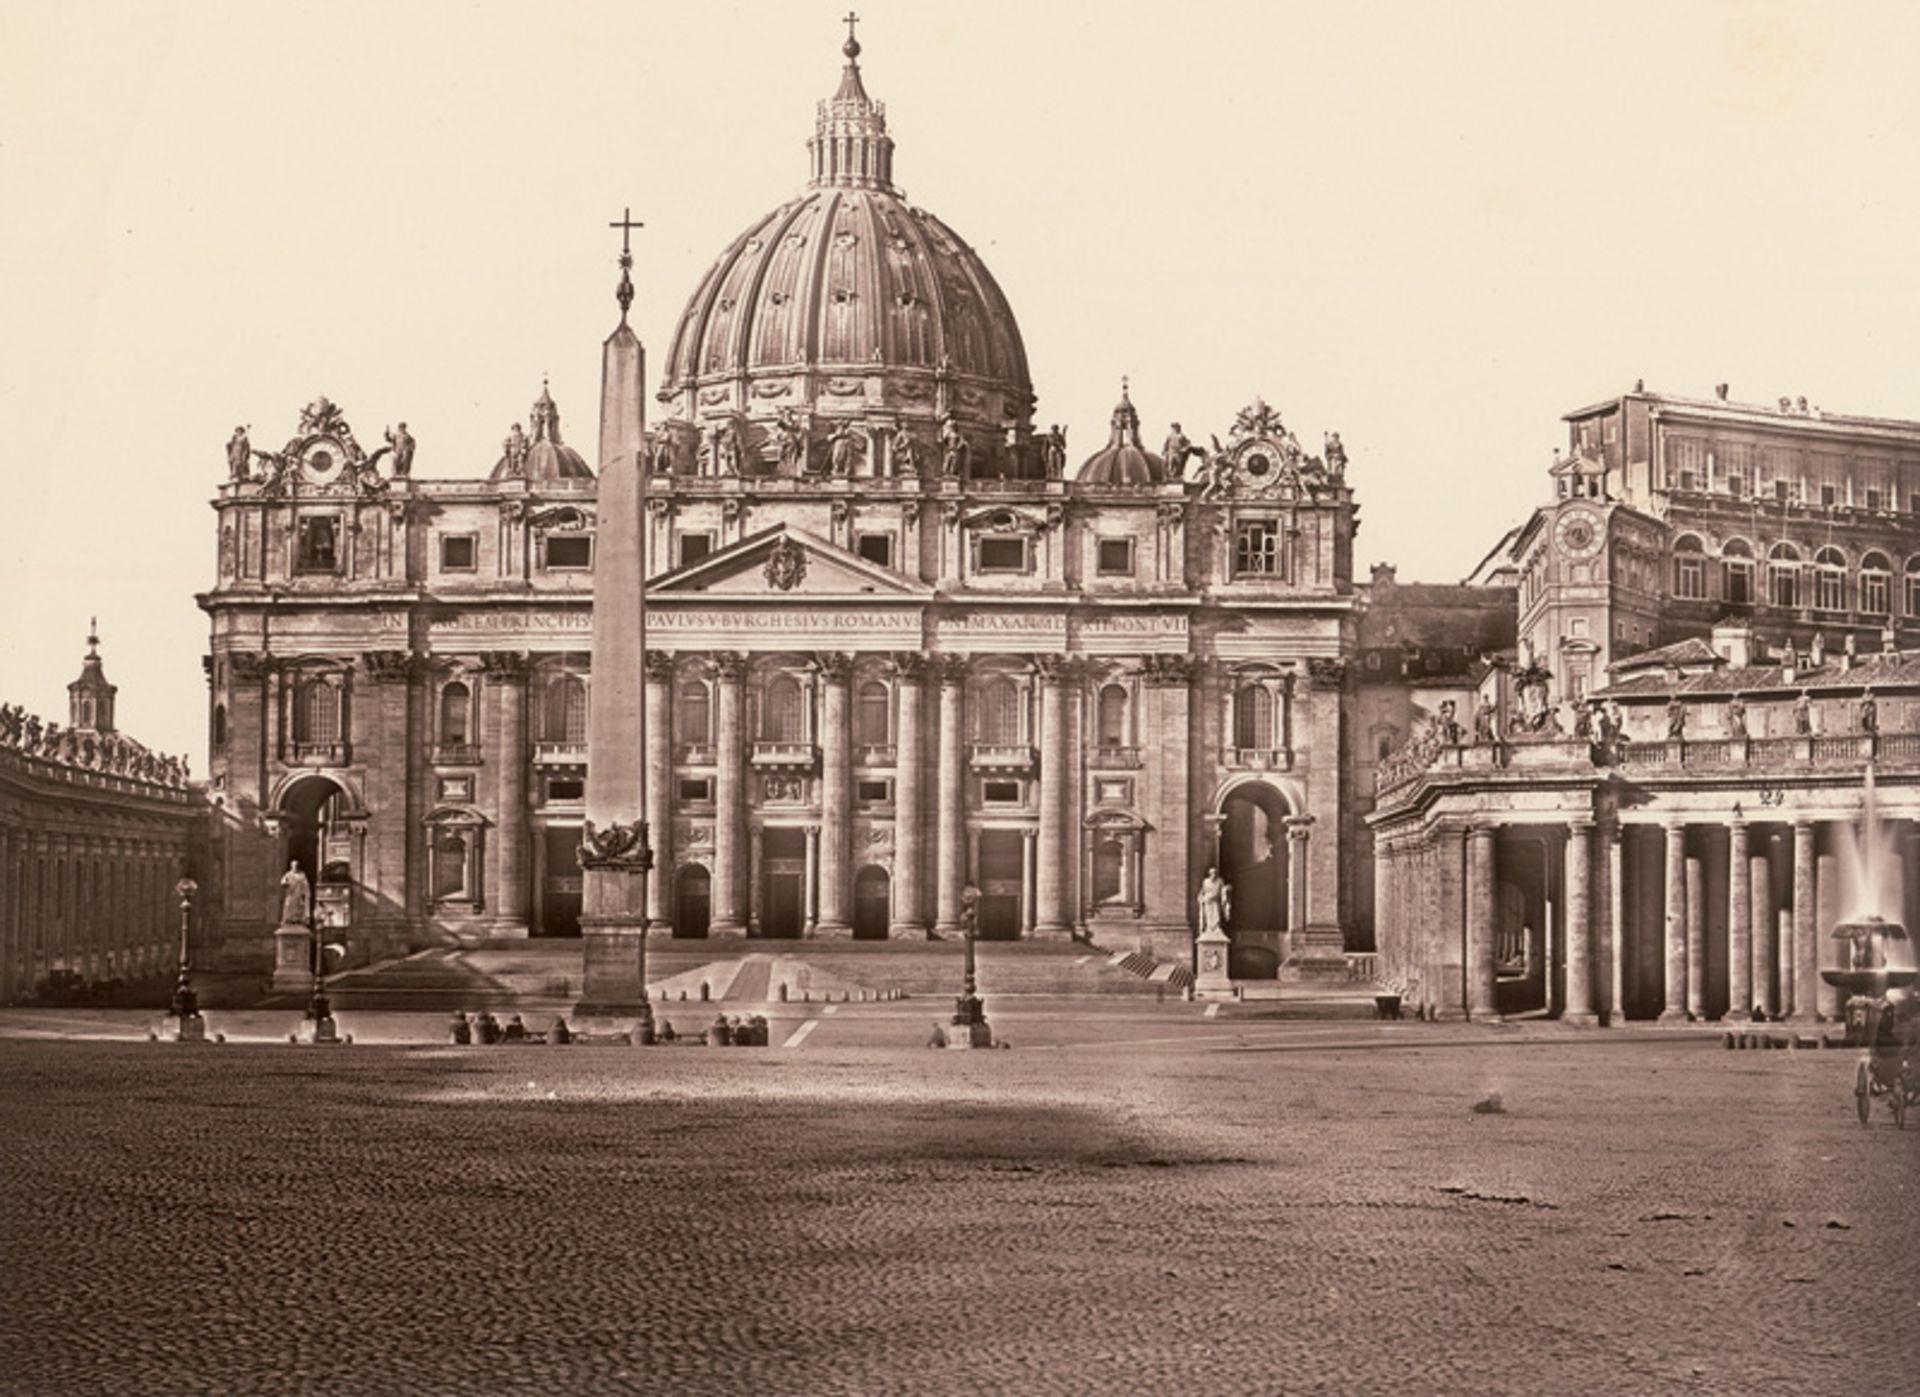 Anderson, James: Views of St. Peter's Basilica, St. Peter's Square